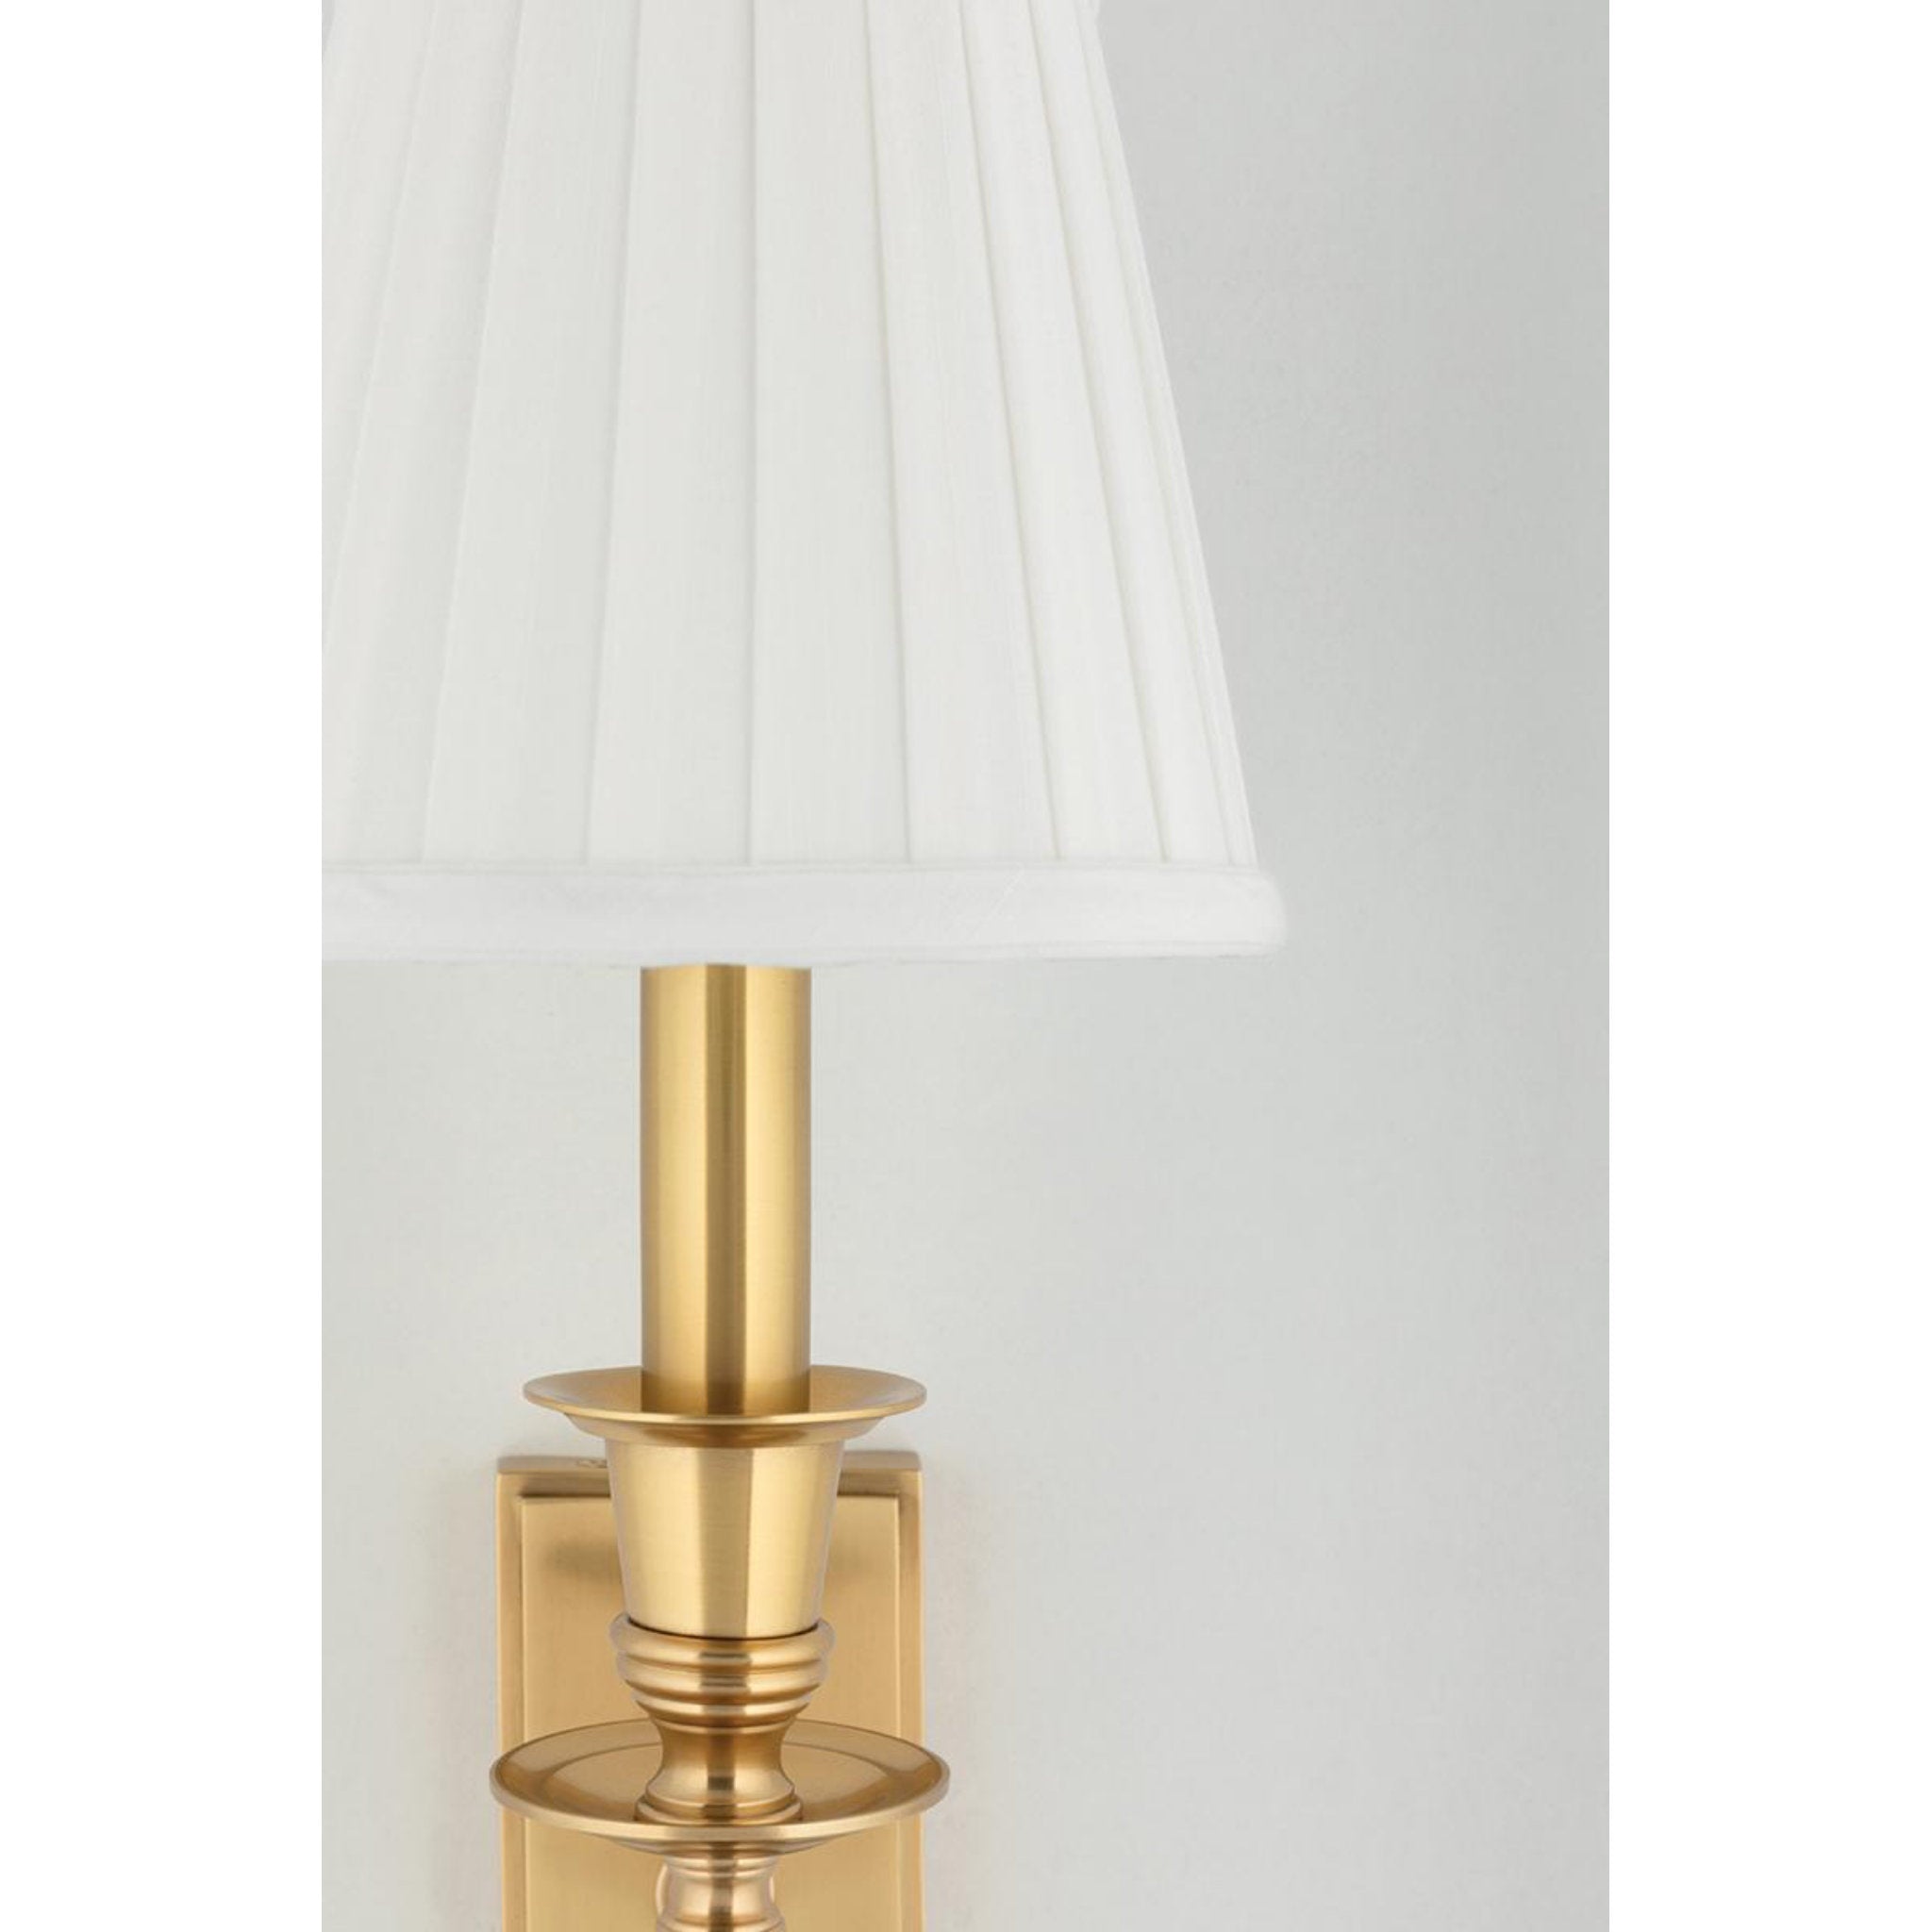 Ludlow 1 Light Wall Sconce in Polished Nickel